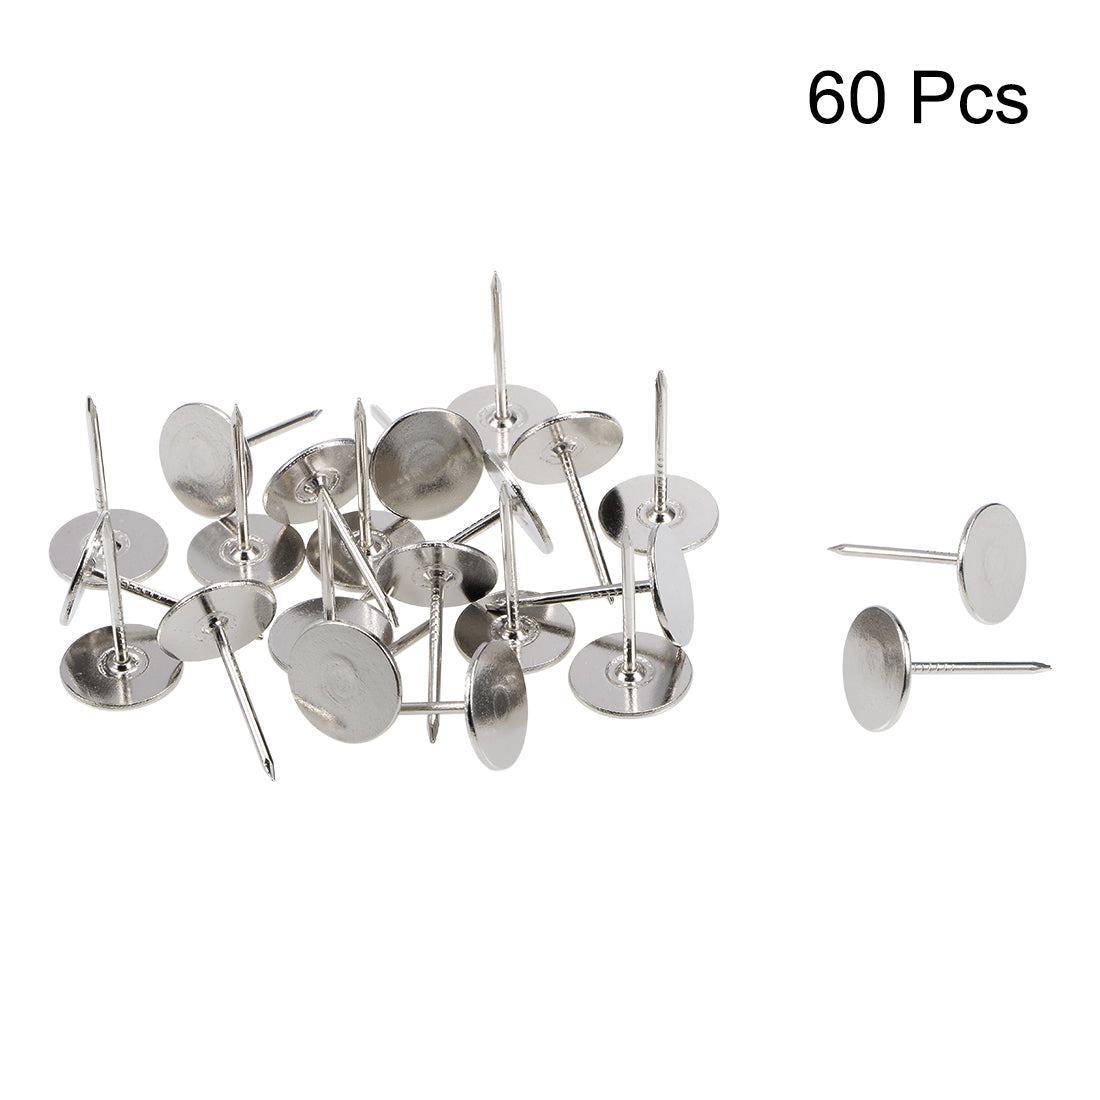 uxcell Uxcell Upholstery Nails Tacks 16mmx25mm Flat Head Furniture Nails Silver Tone 60 Pcs